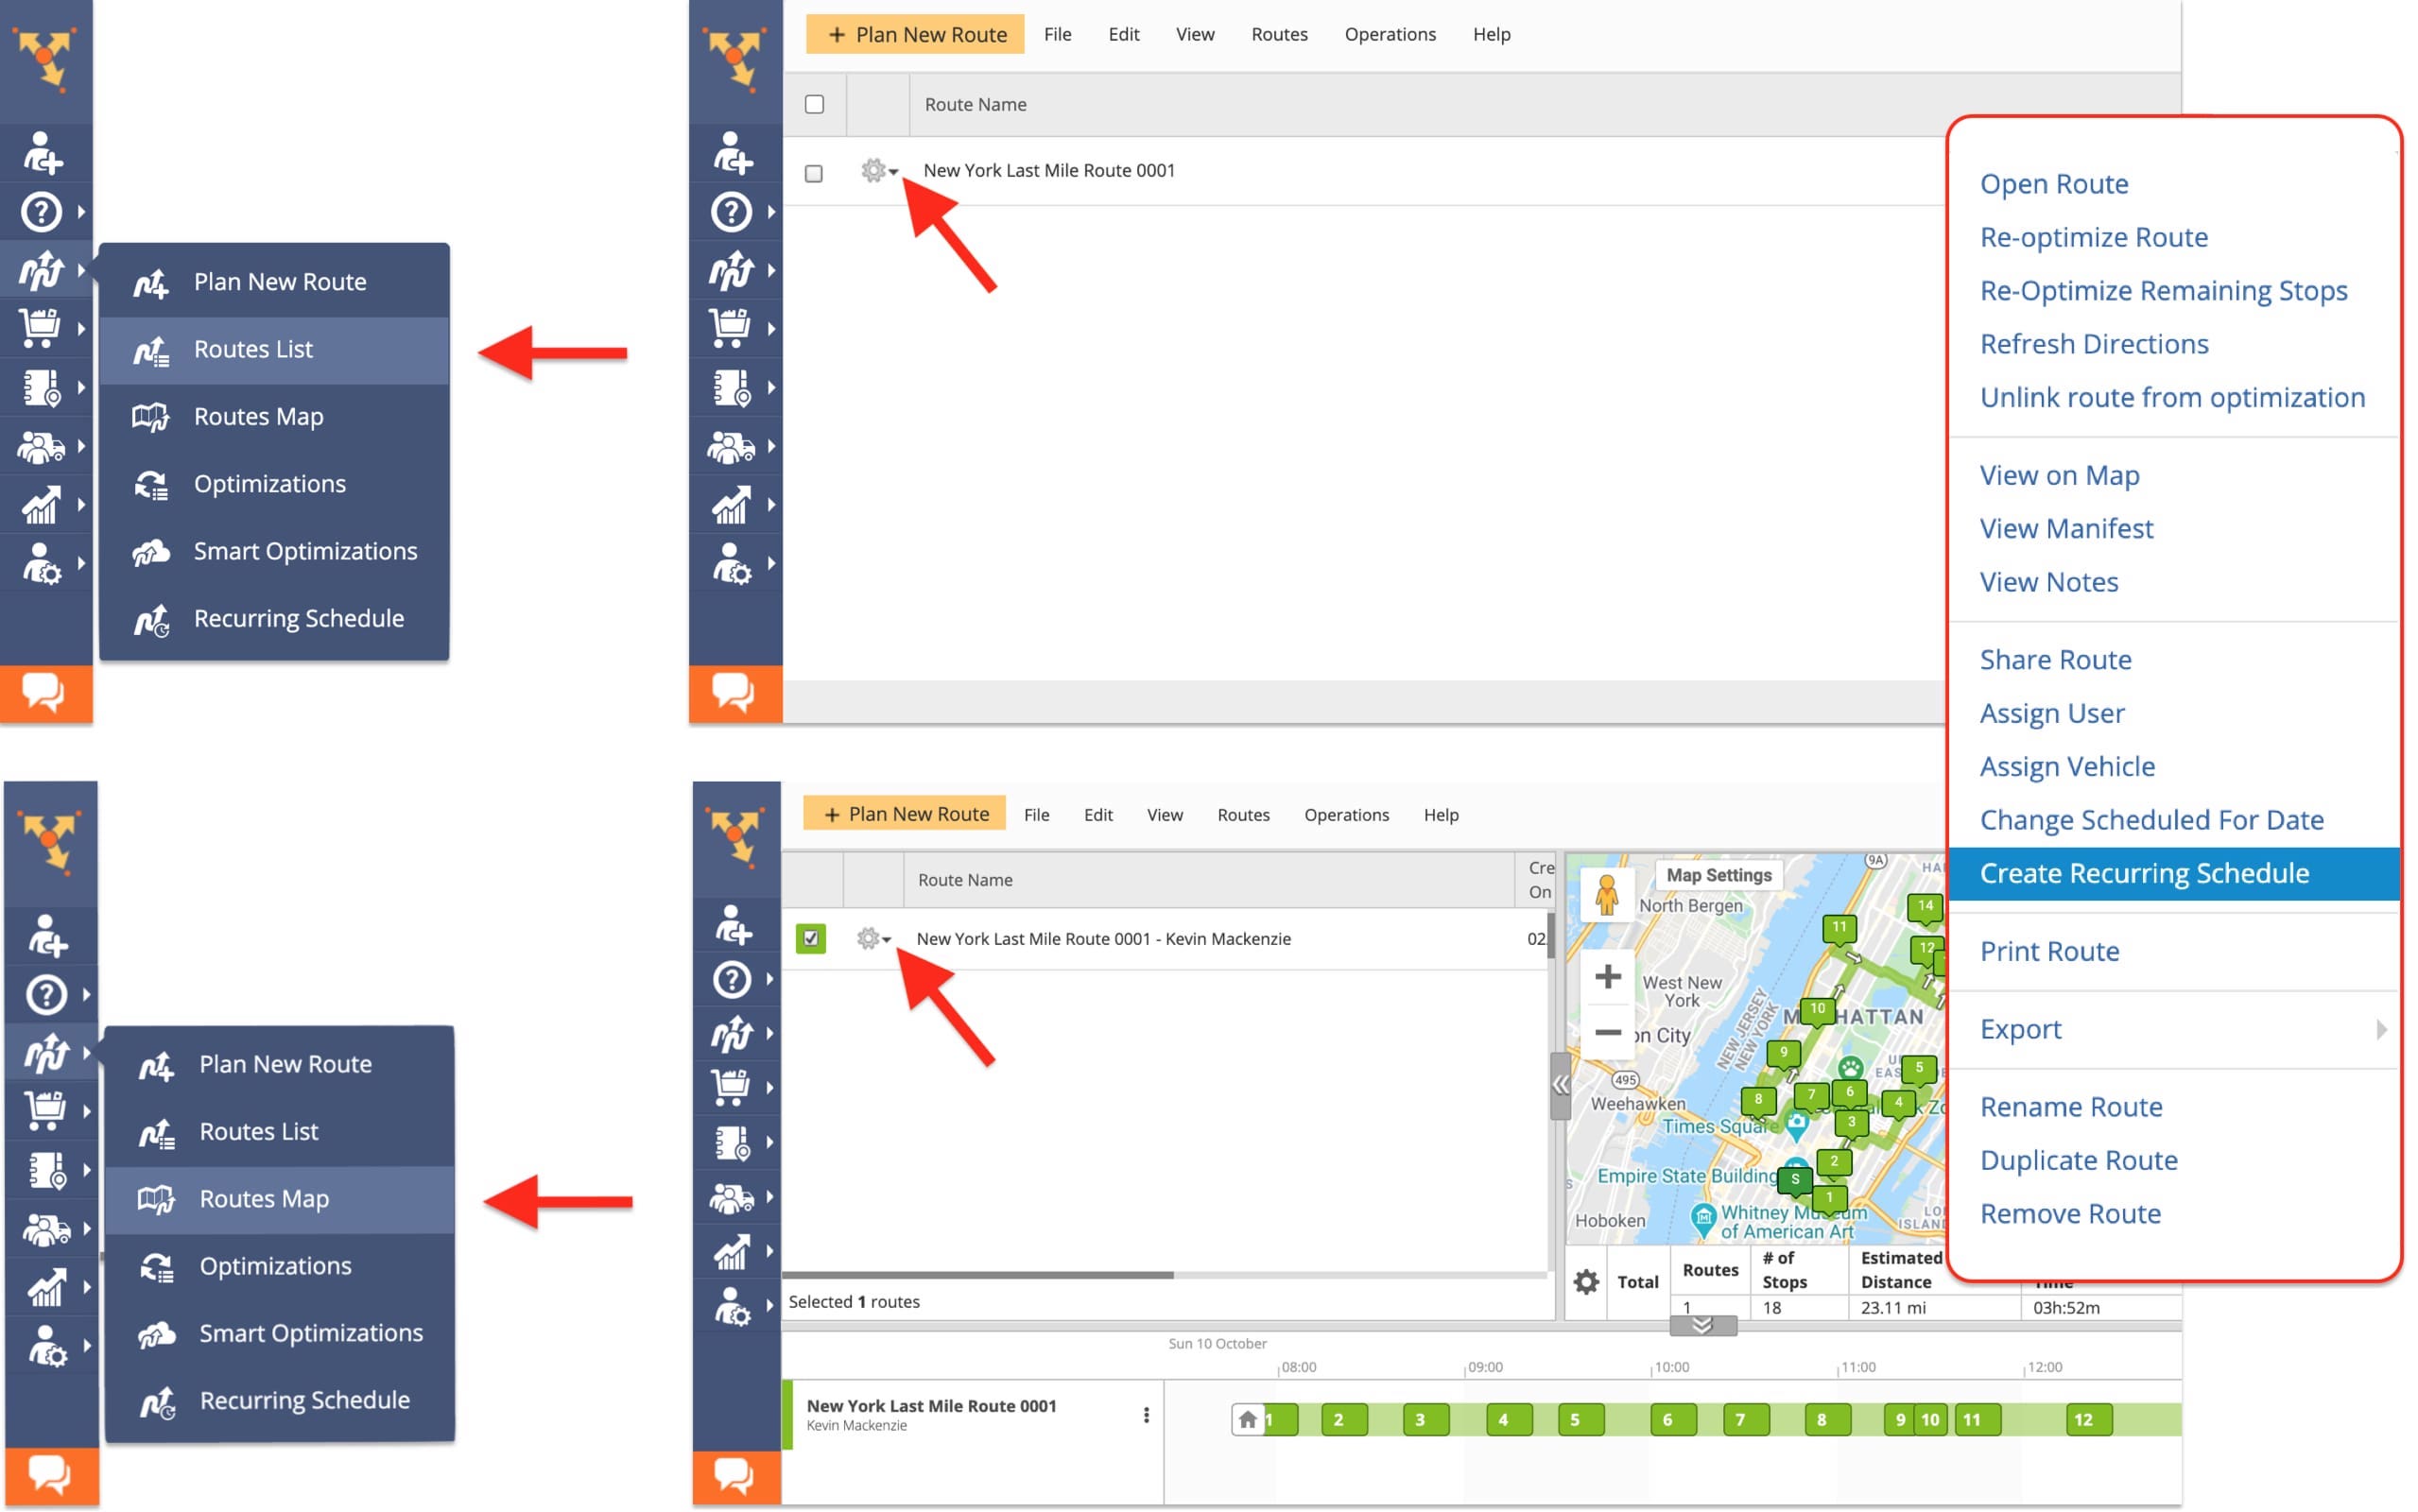 Route planner can plan recurring routes based on route calendar using delivery route template.